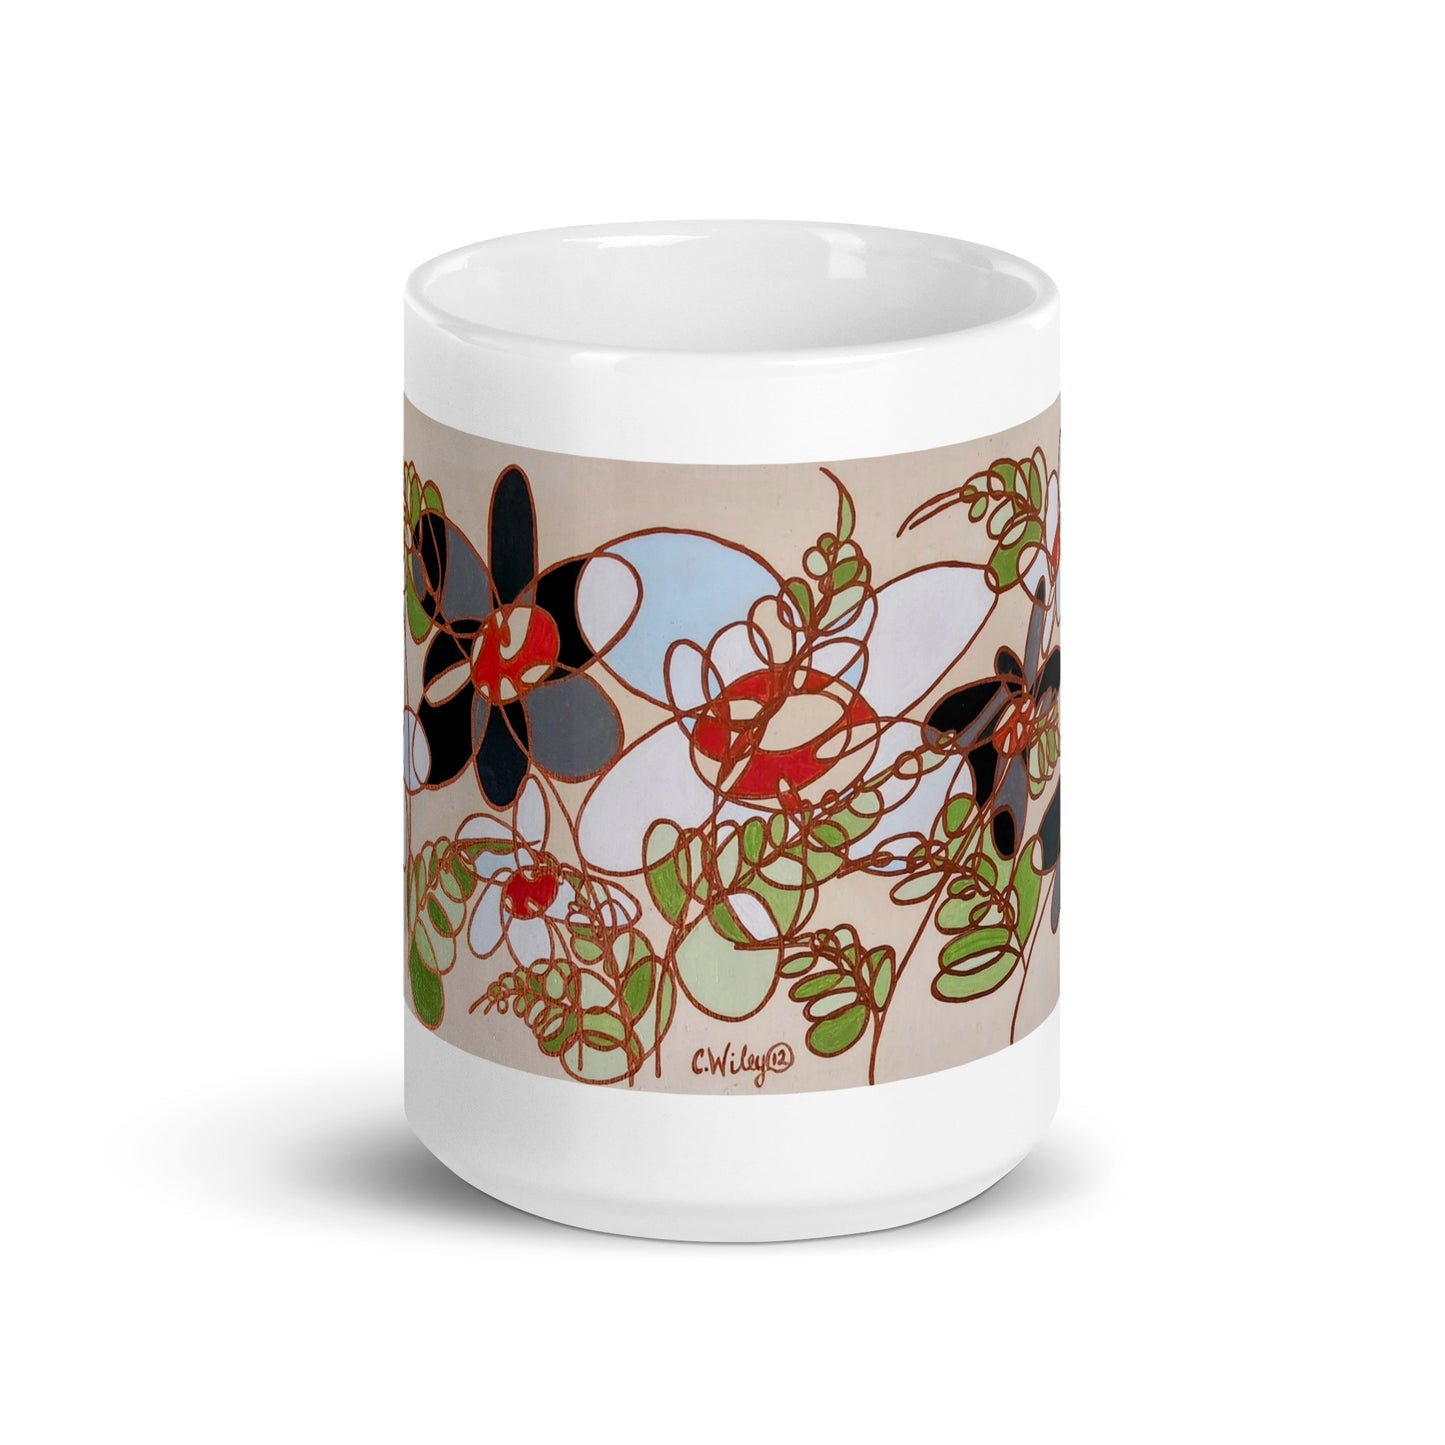 Abstract Flowers in Burnt Orange and Black White glossy mug